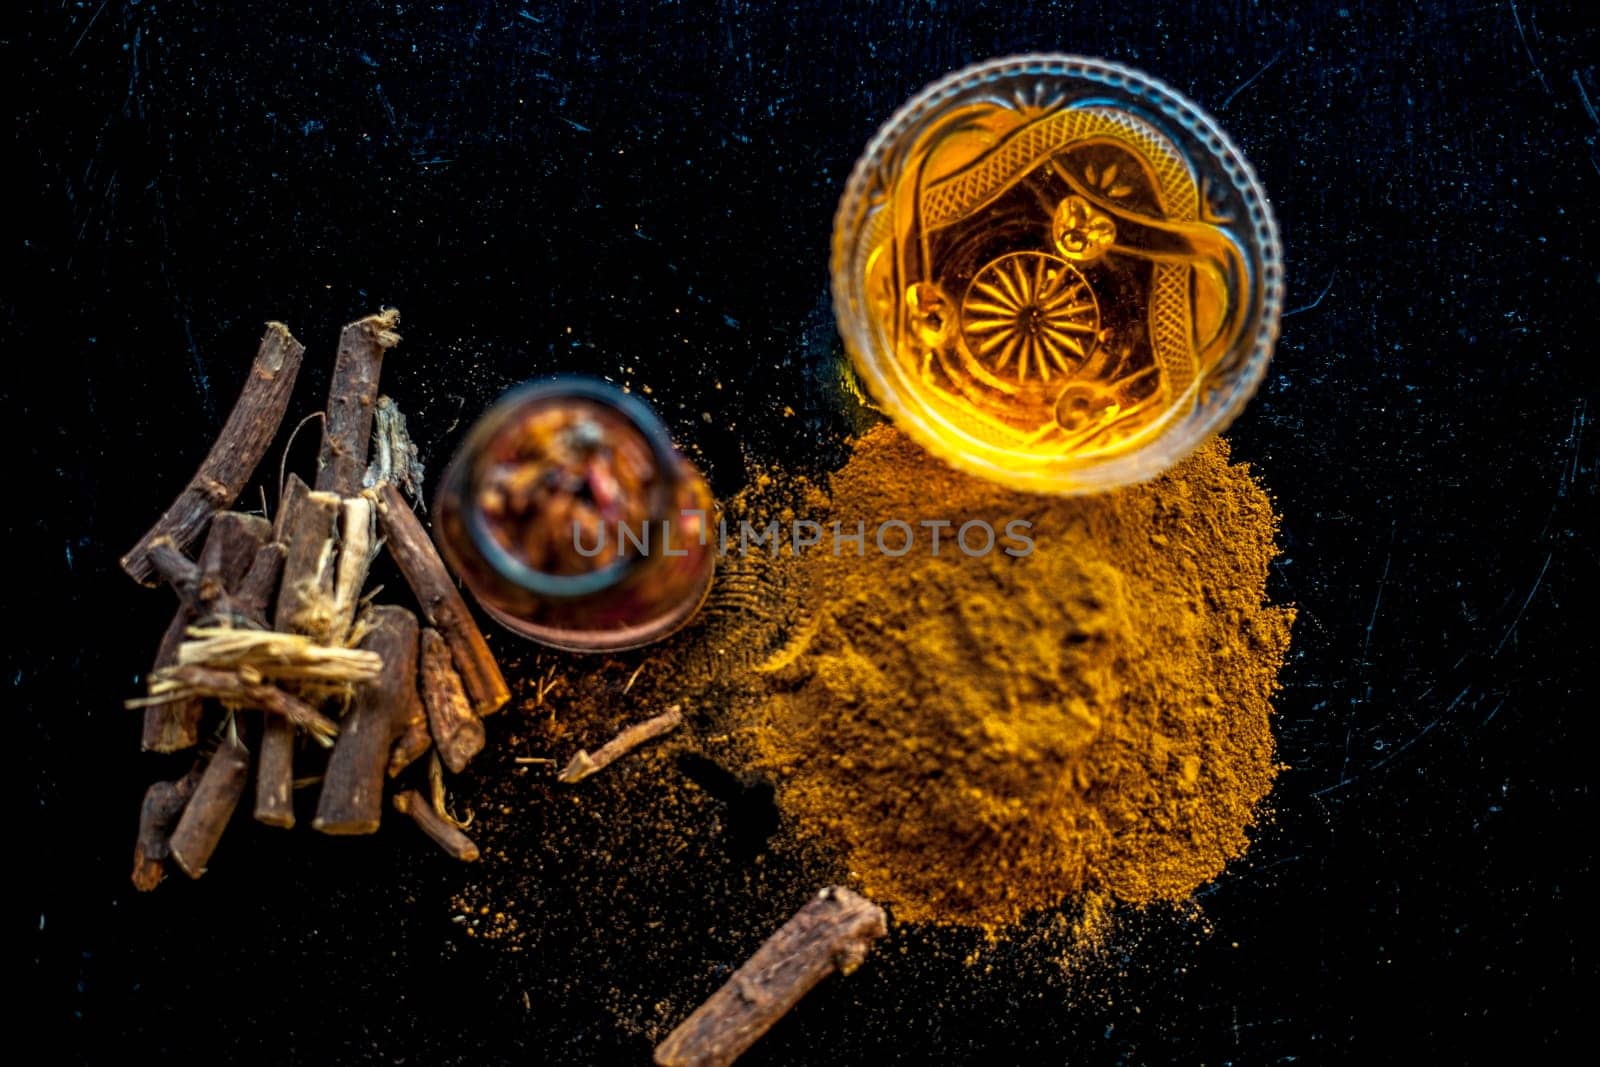 Quick Healing wound paste consisting of natural ayurvedic herbs i.e. Revand chini well mixed with rose water and honey. Shot of revand chini roots, powder, rose water and honey on a wooden surface.